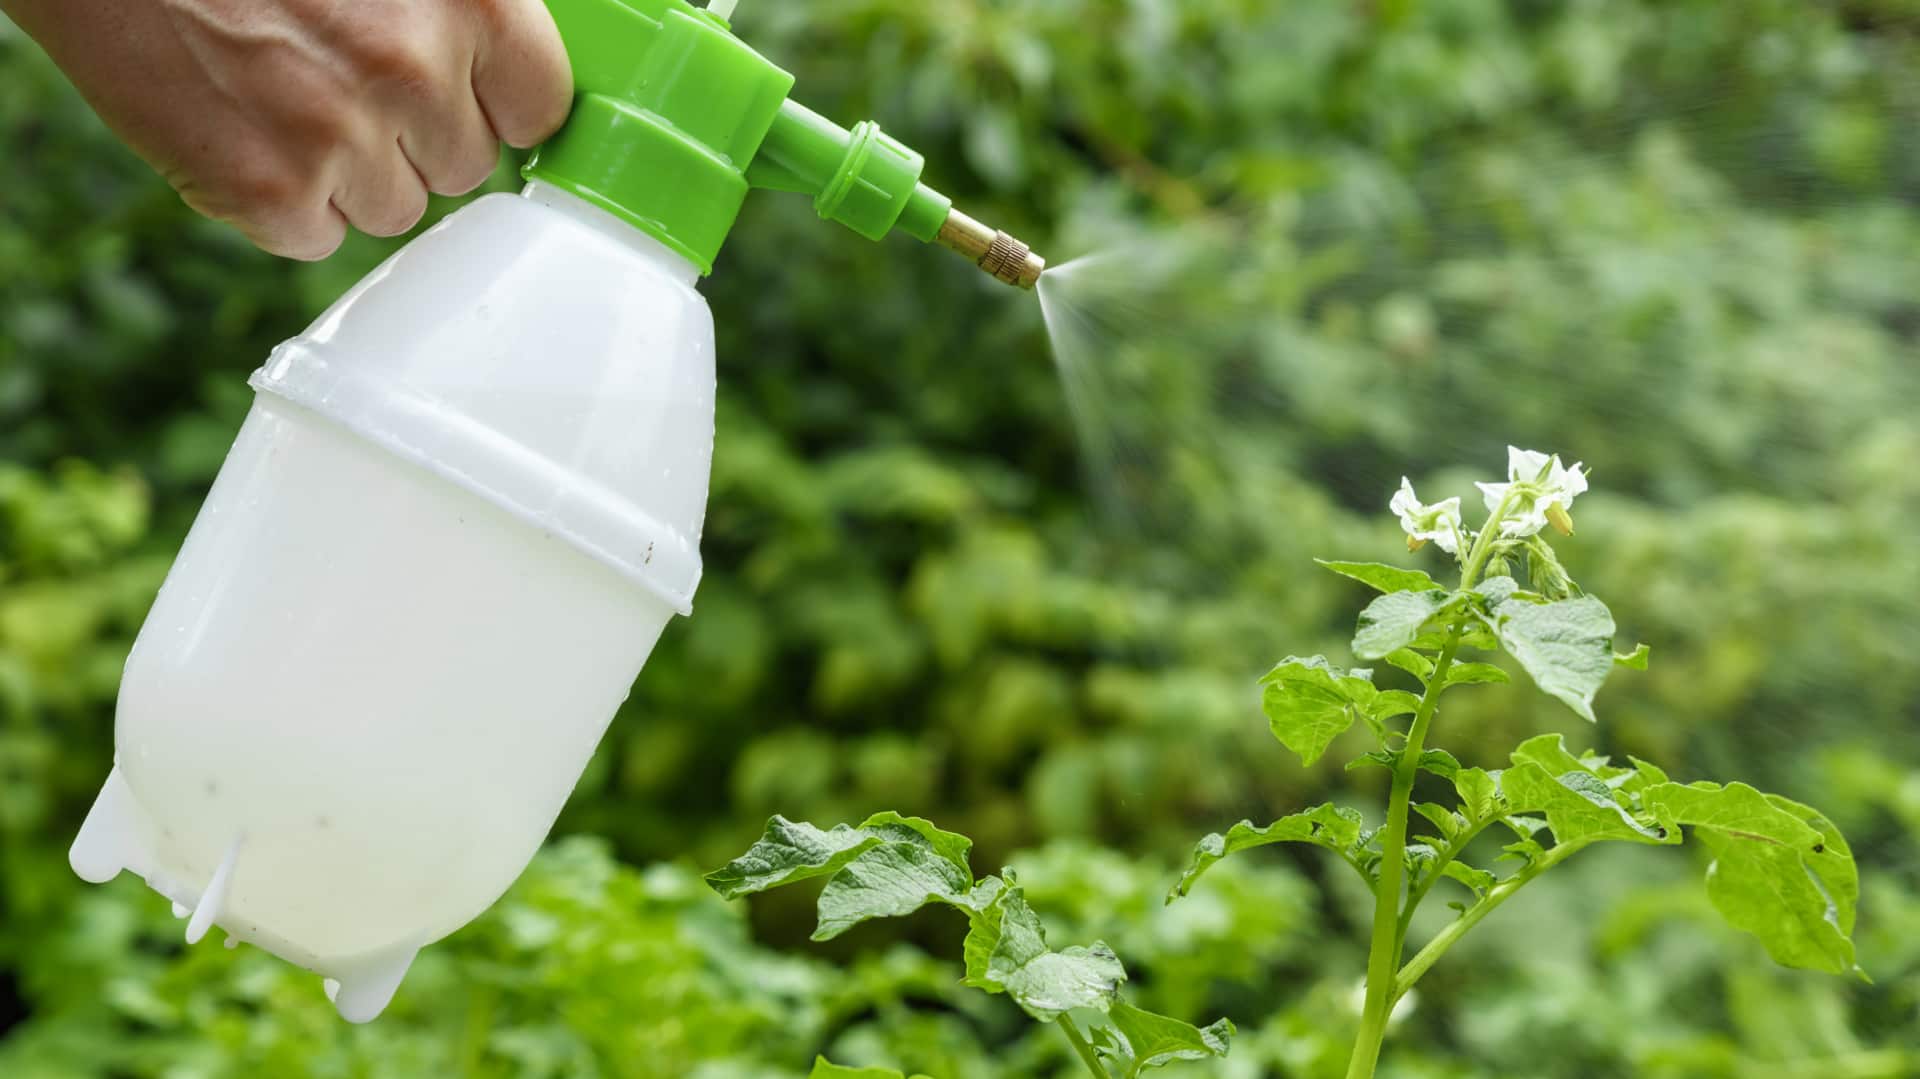 Make insecticides at home to protect your plants: Here's how